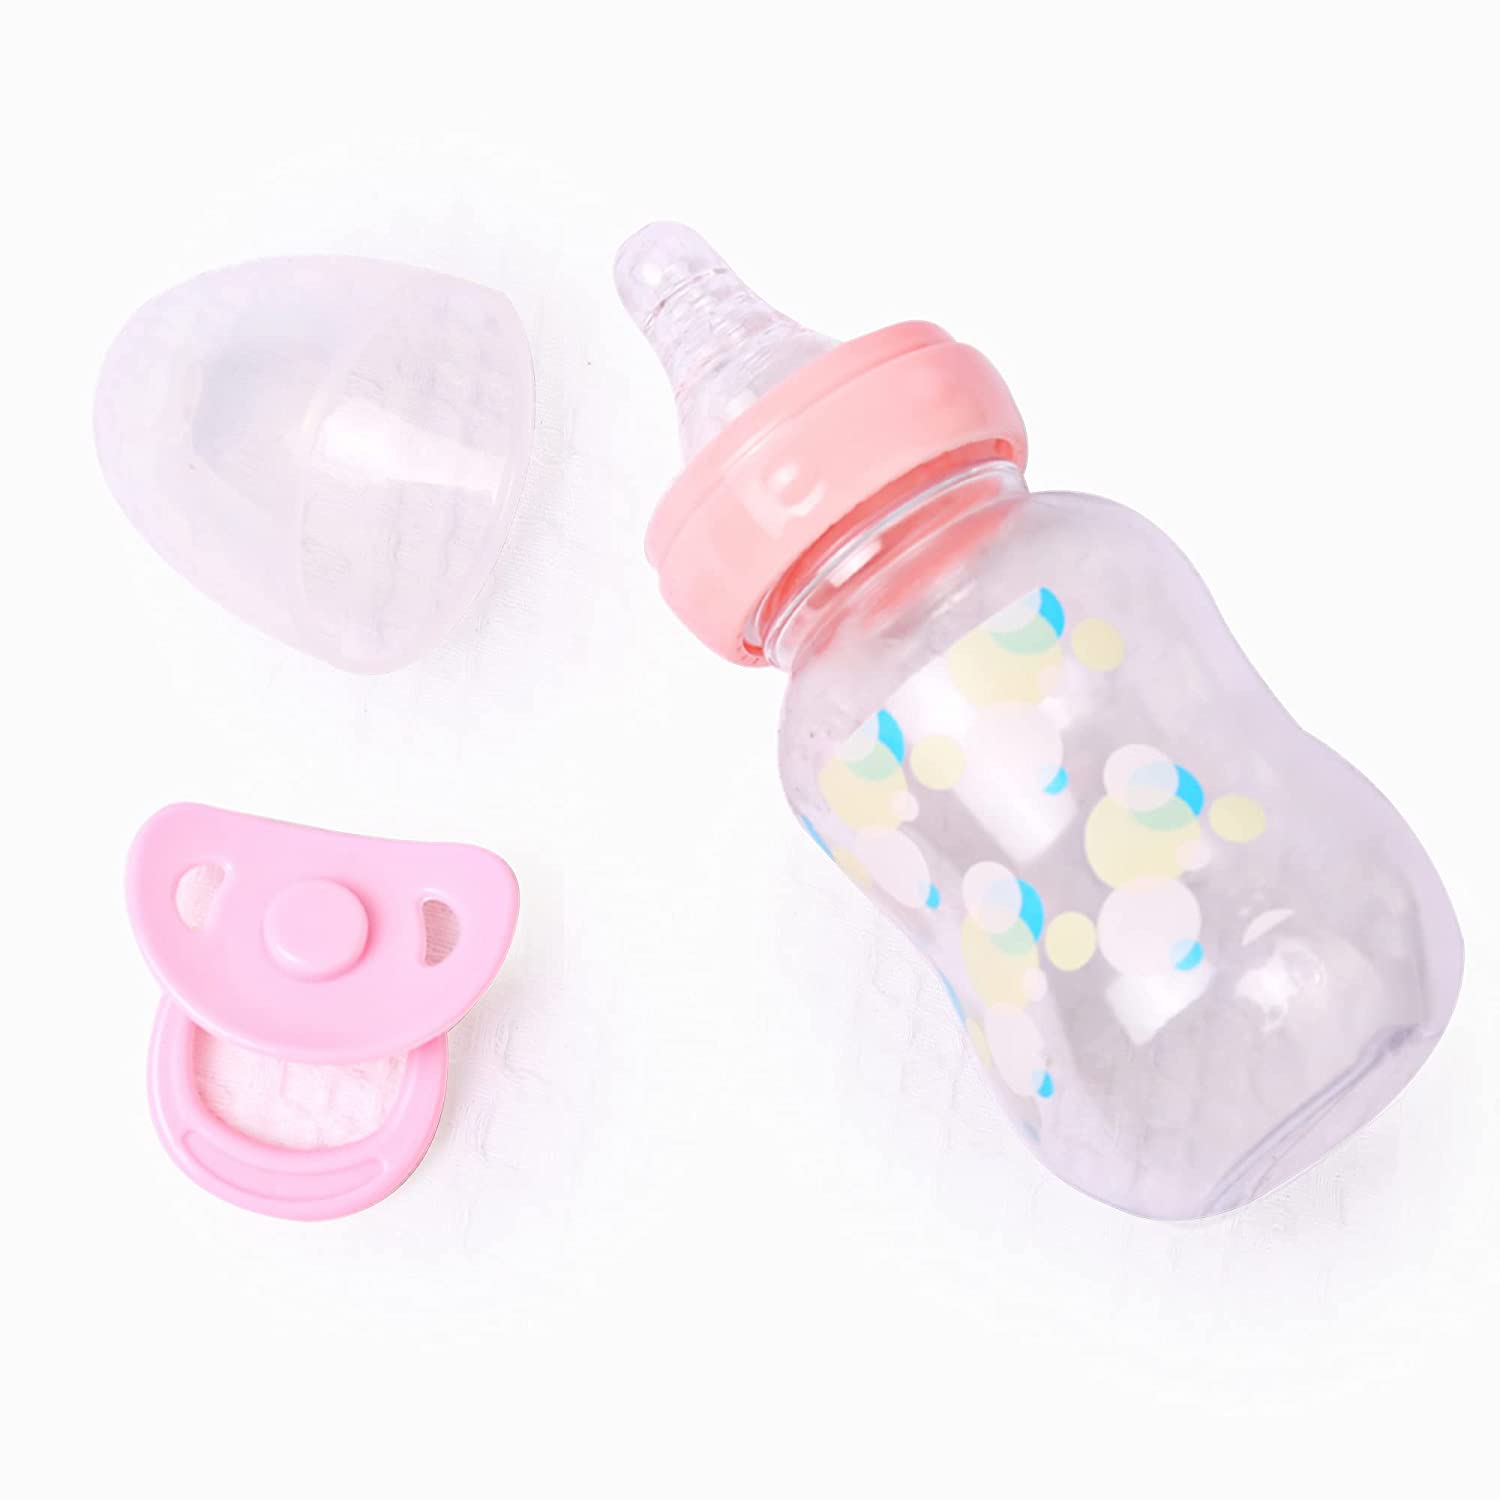 Doll Accessories Bottles&Pacifier Fit for 16-20